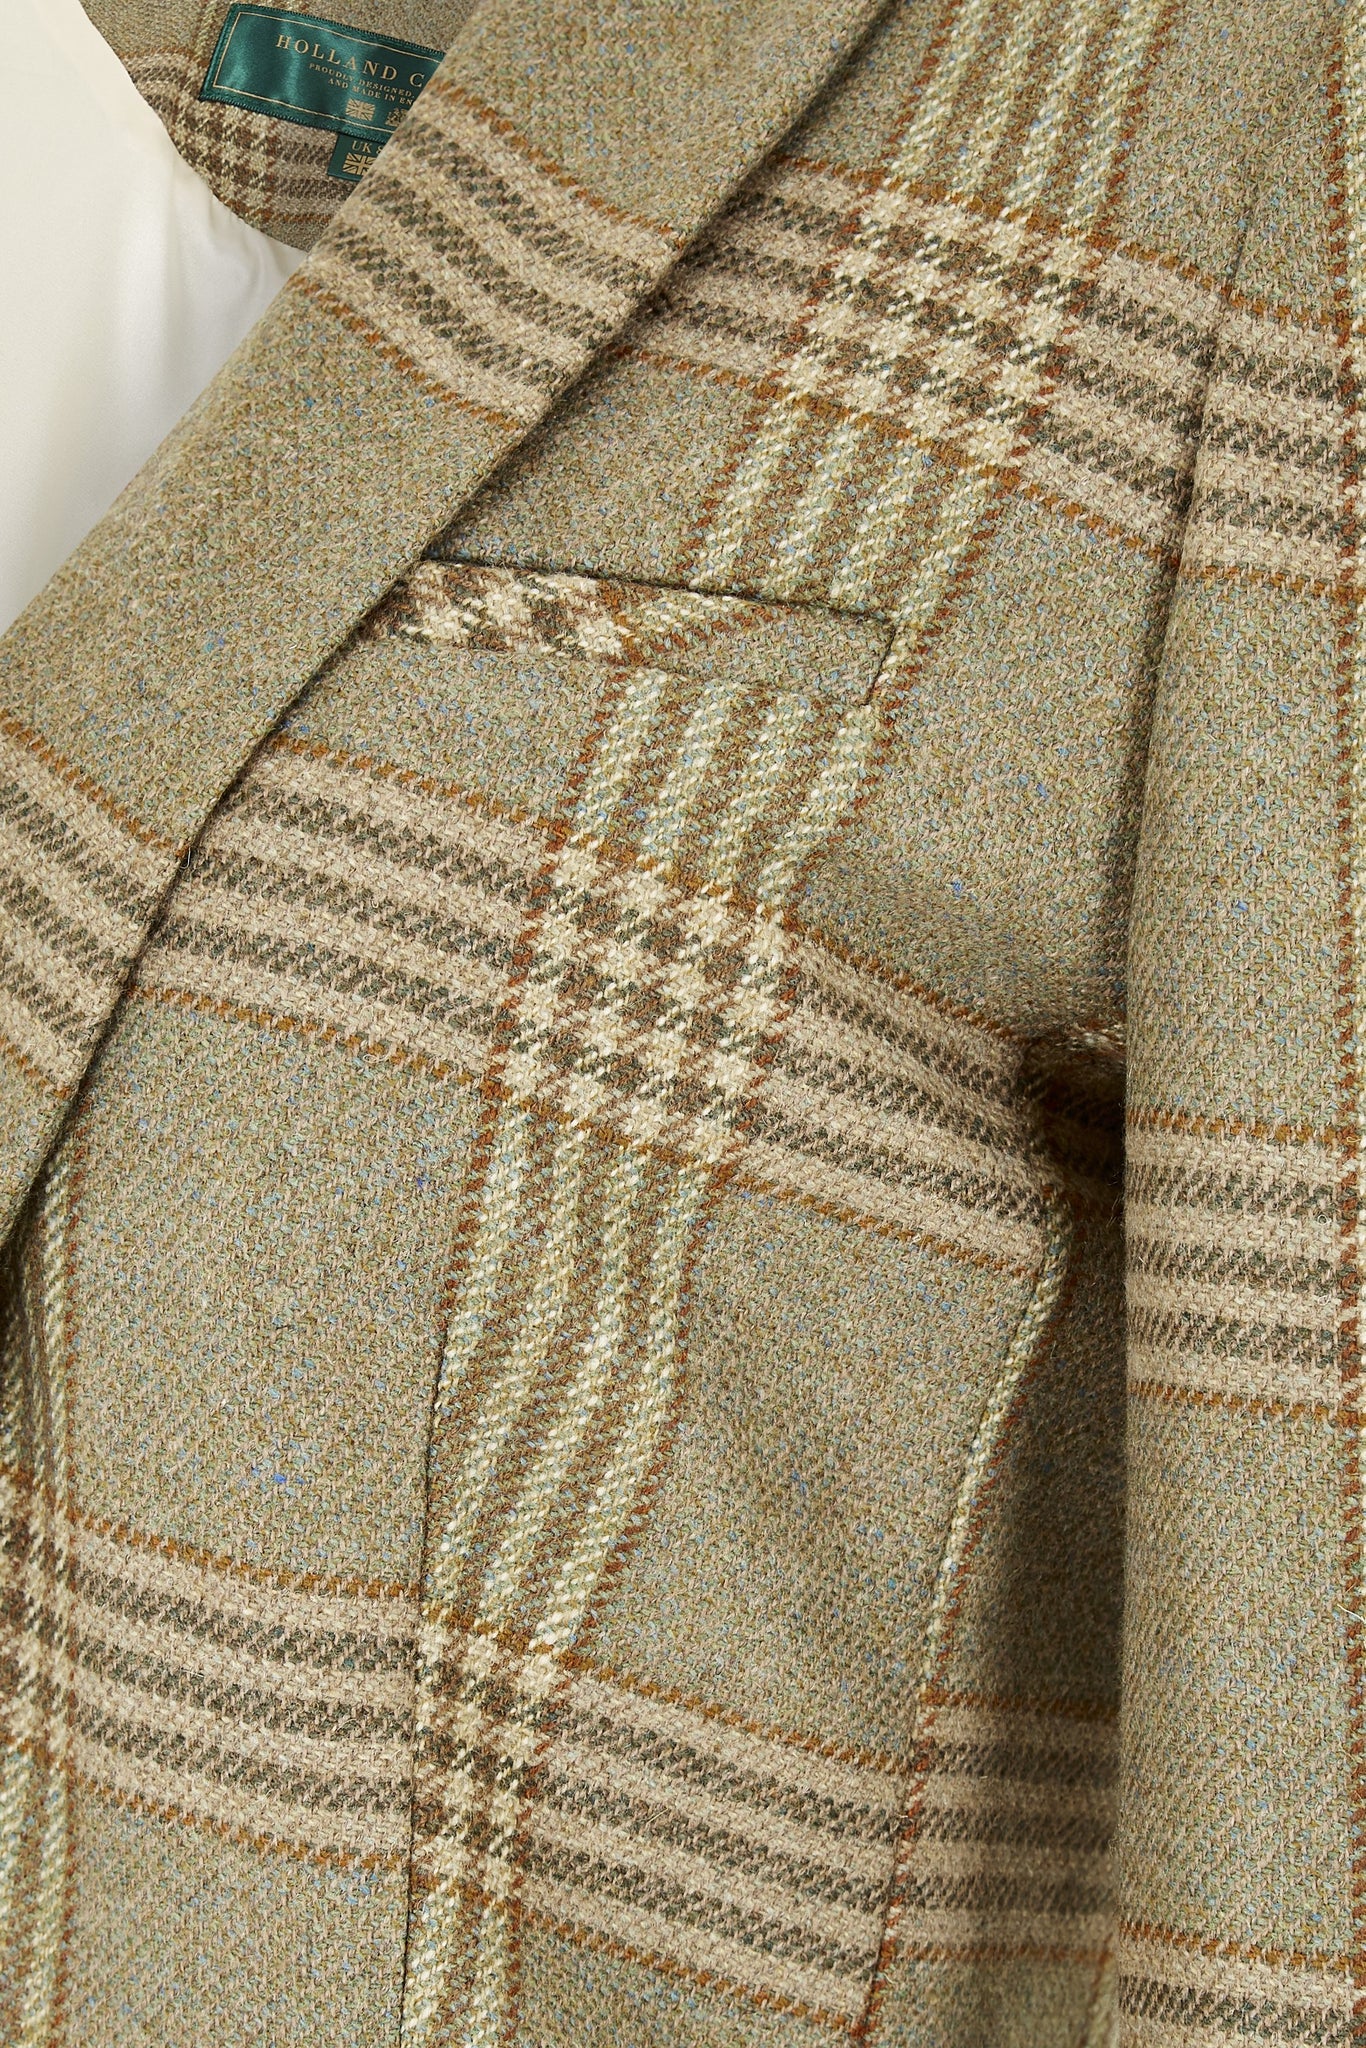 pocket detail of green tweed womens coat with gold hardware and tan suede detailing